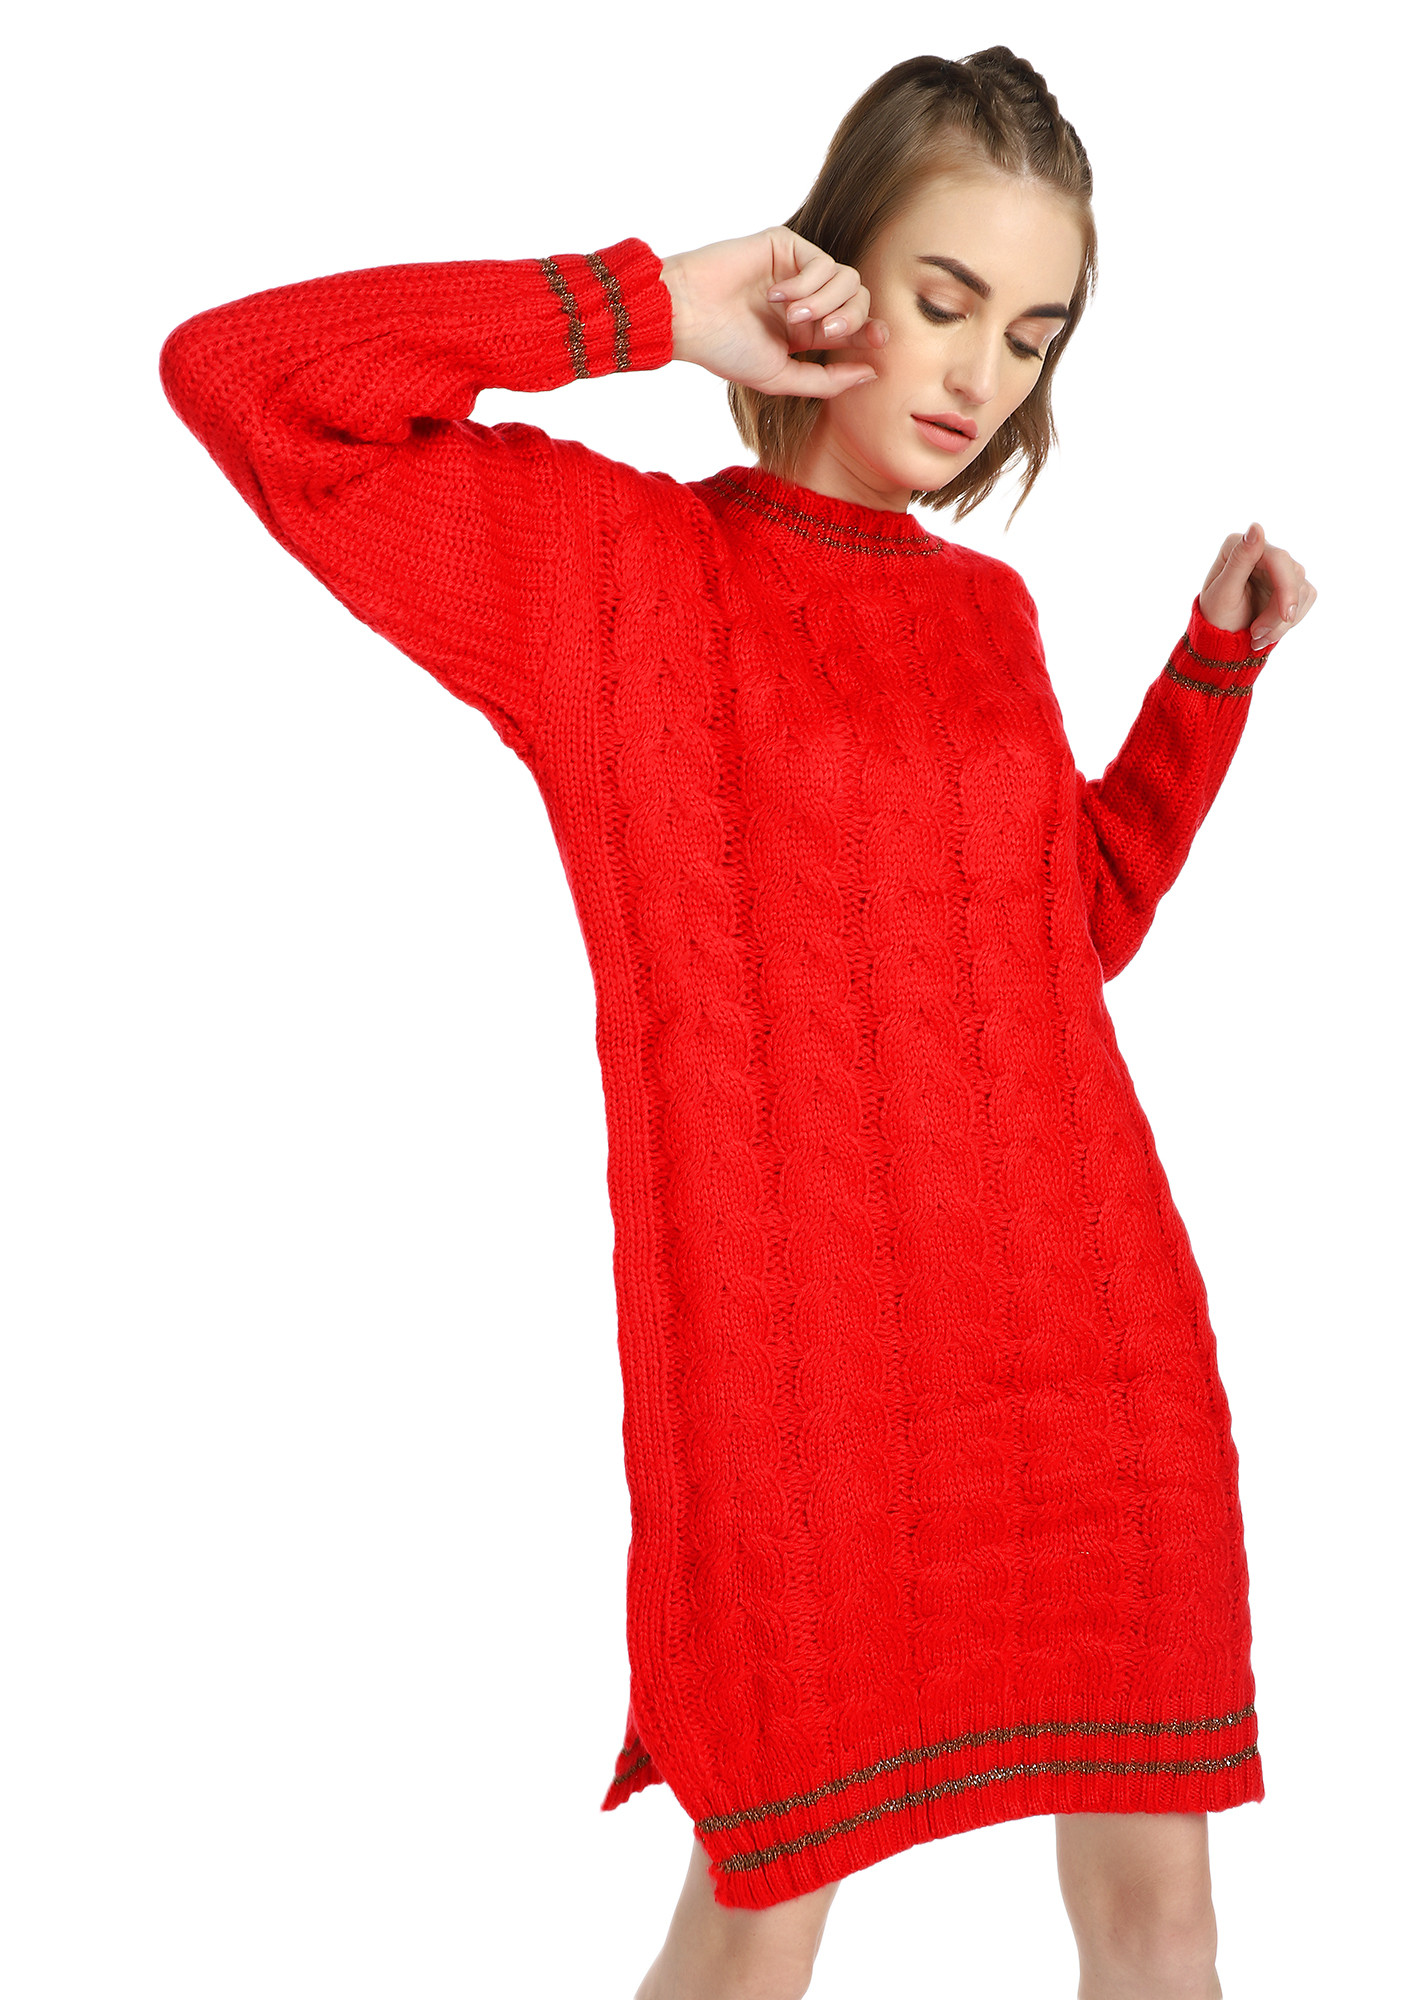 WINTER GAME RULES RED KNIT DRESS